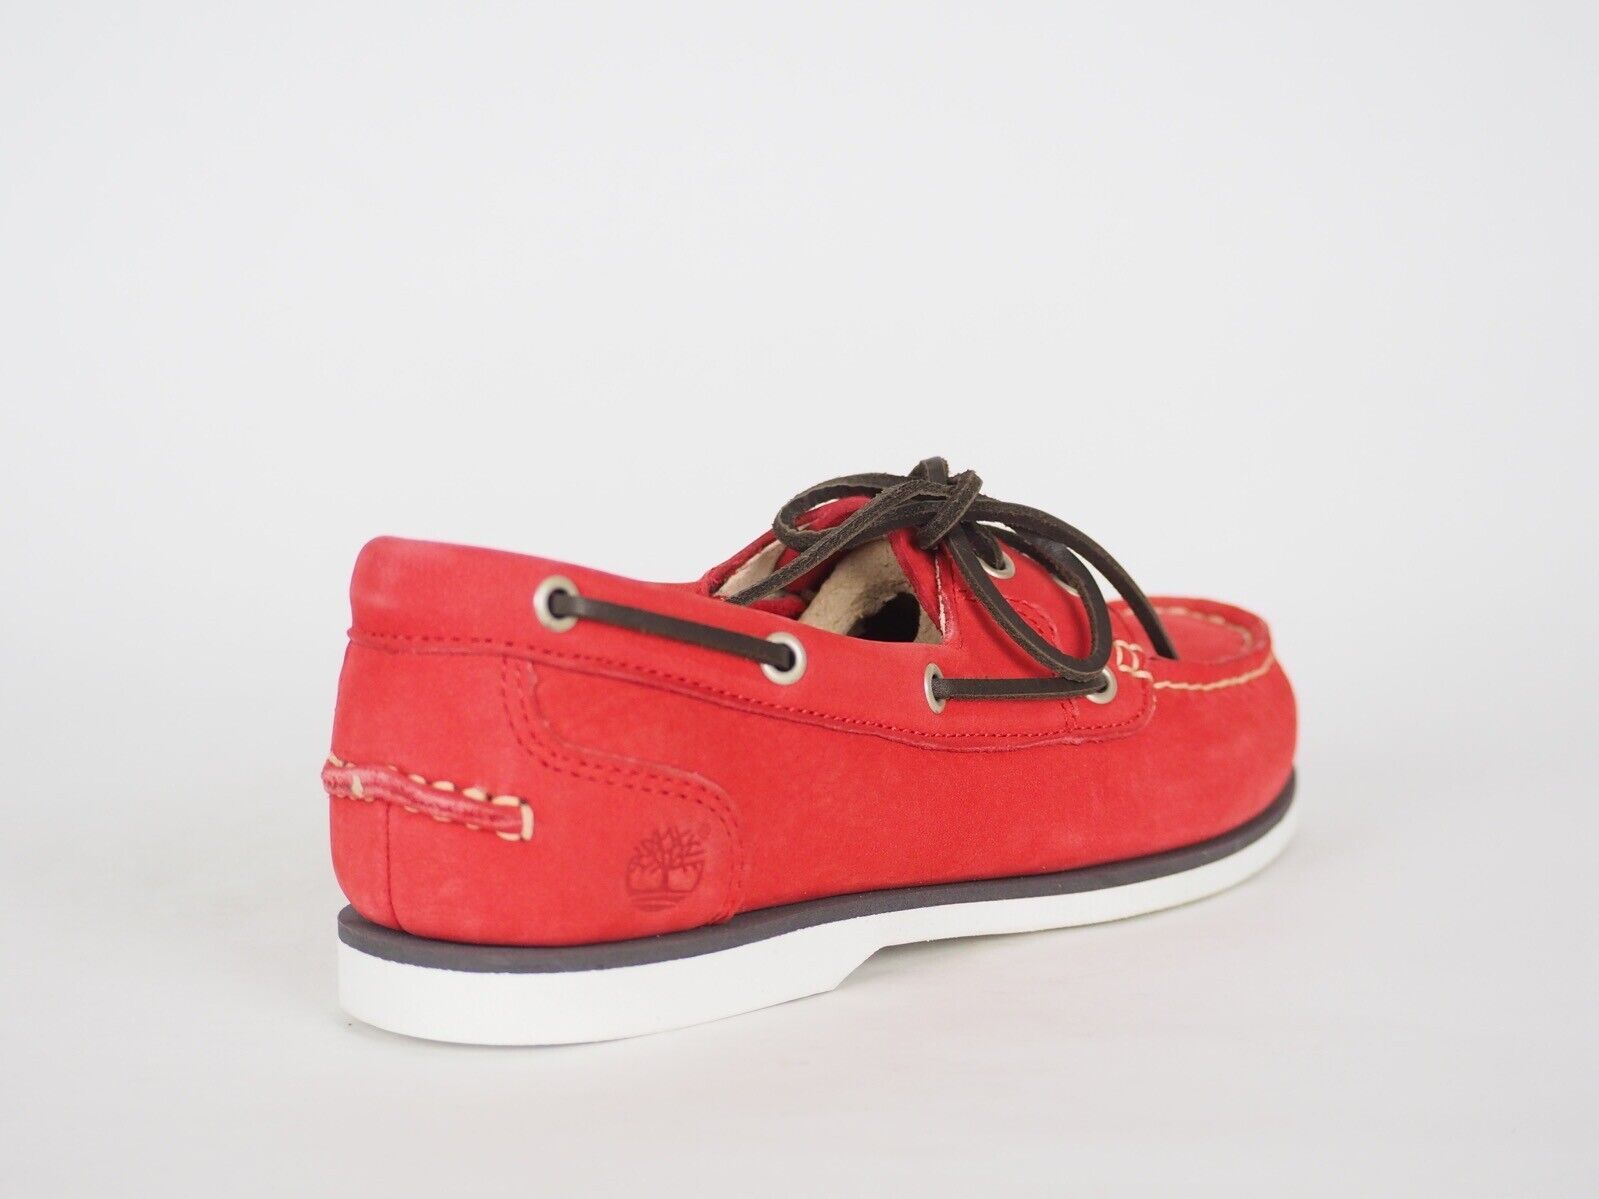 Womens Timberland EK Classic 8357A Coral Leather 2 Eye Lace Up Casual Boat Shoes